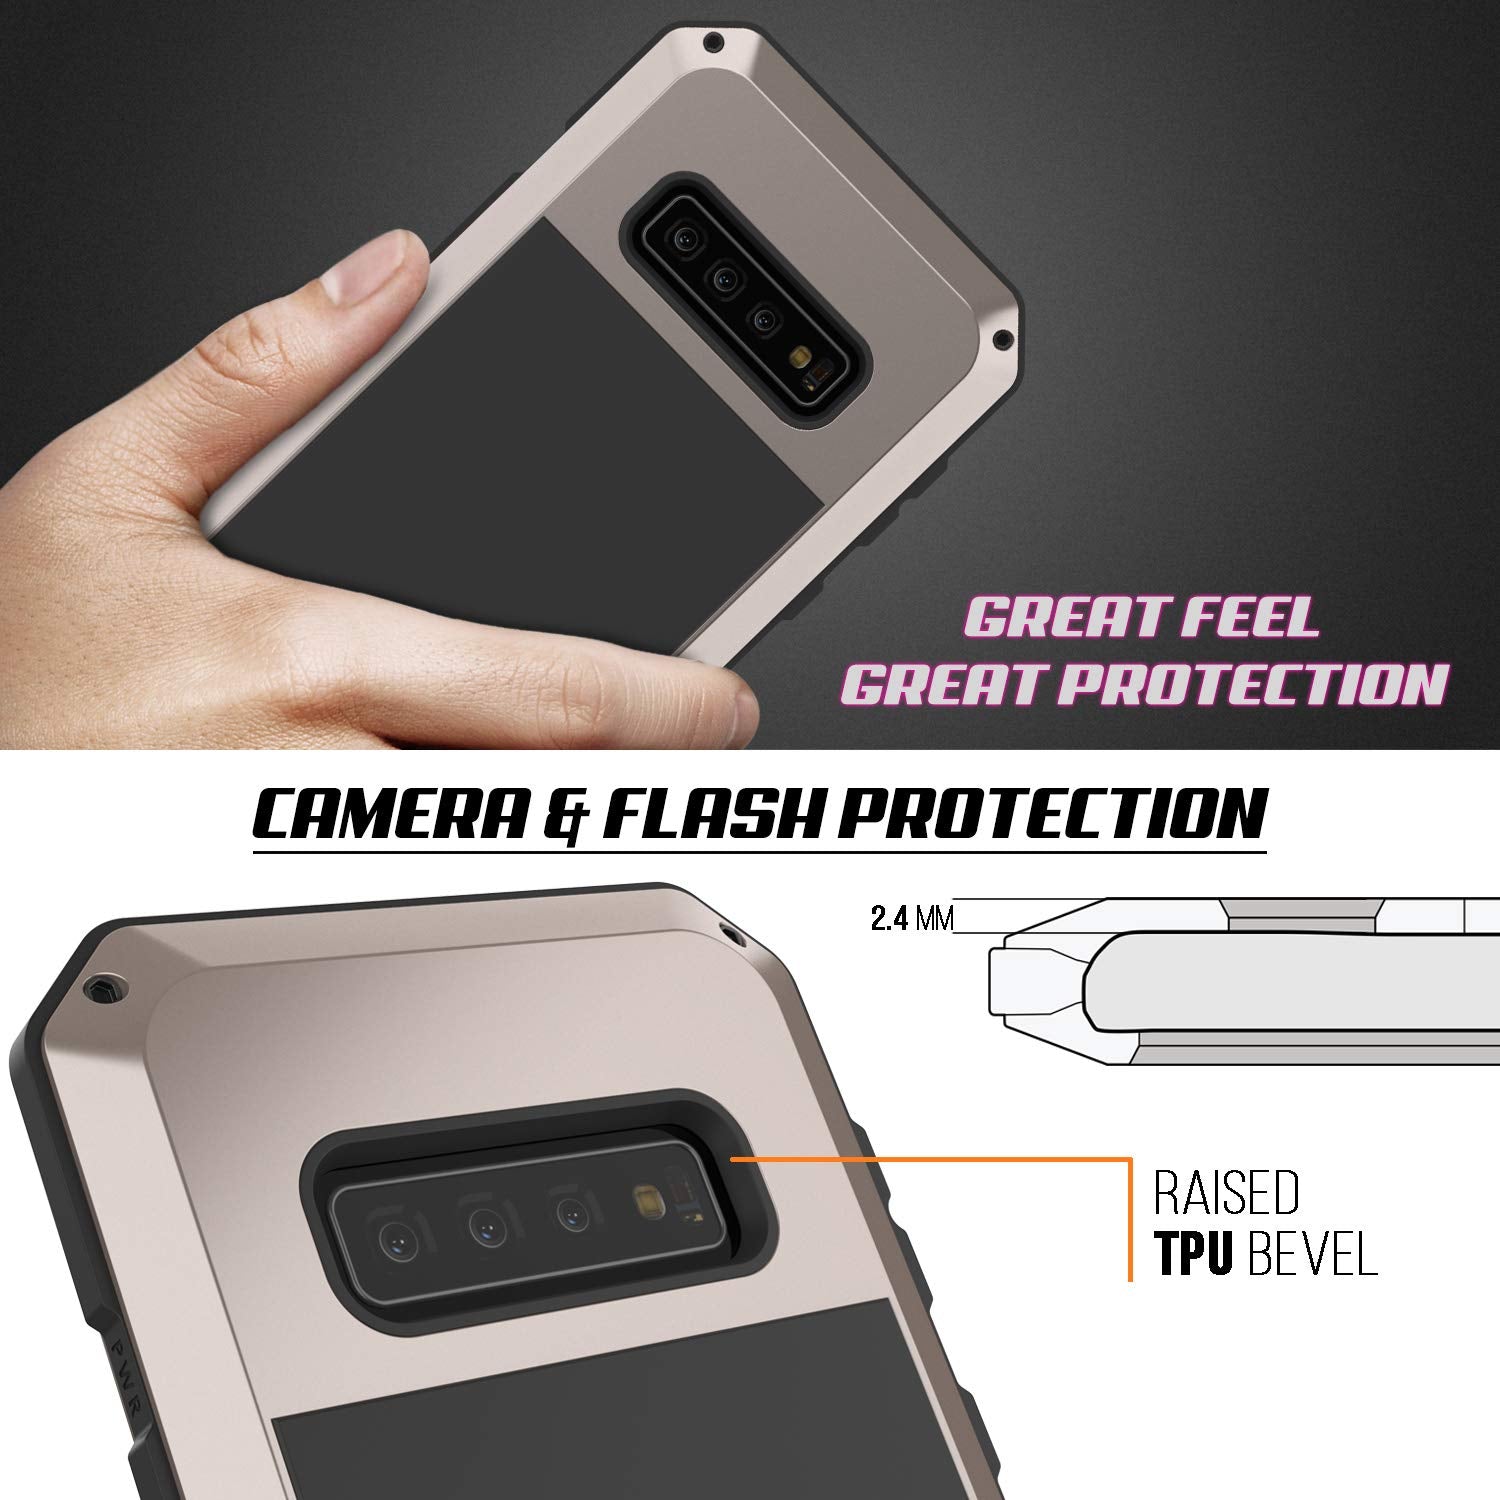 Galaxy S10+ Plus Metal Case, Heavy Duty Military Grade Rugged Armor Cover [Gold]